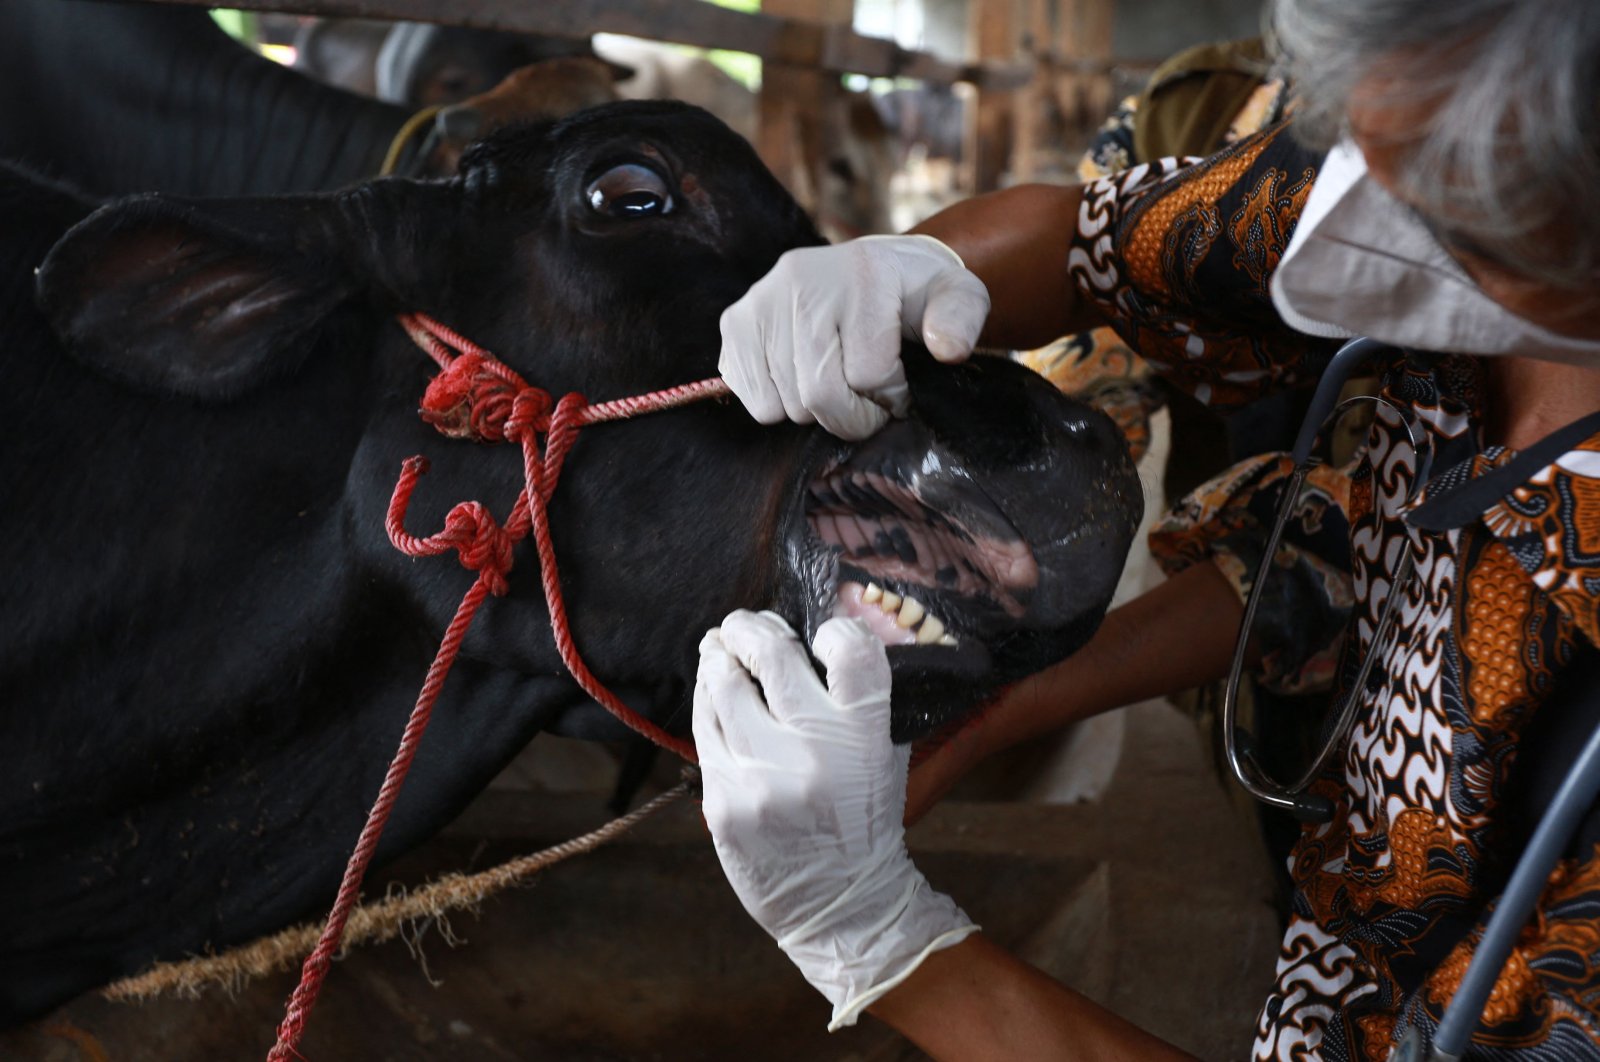 A veterinarian inspects cattle for foot-and-mouth disease in Bandar Lampung, Lampung province, Indonesia, June 16, 2022. (AFP Photo)